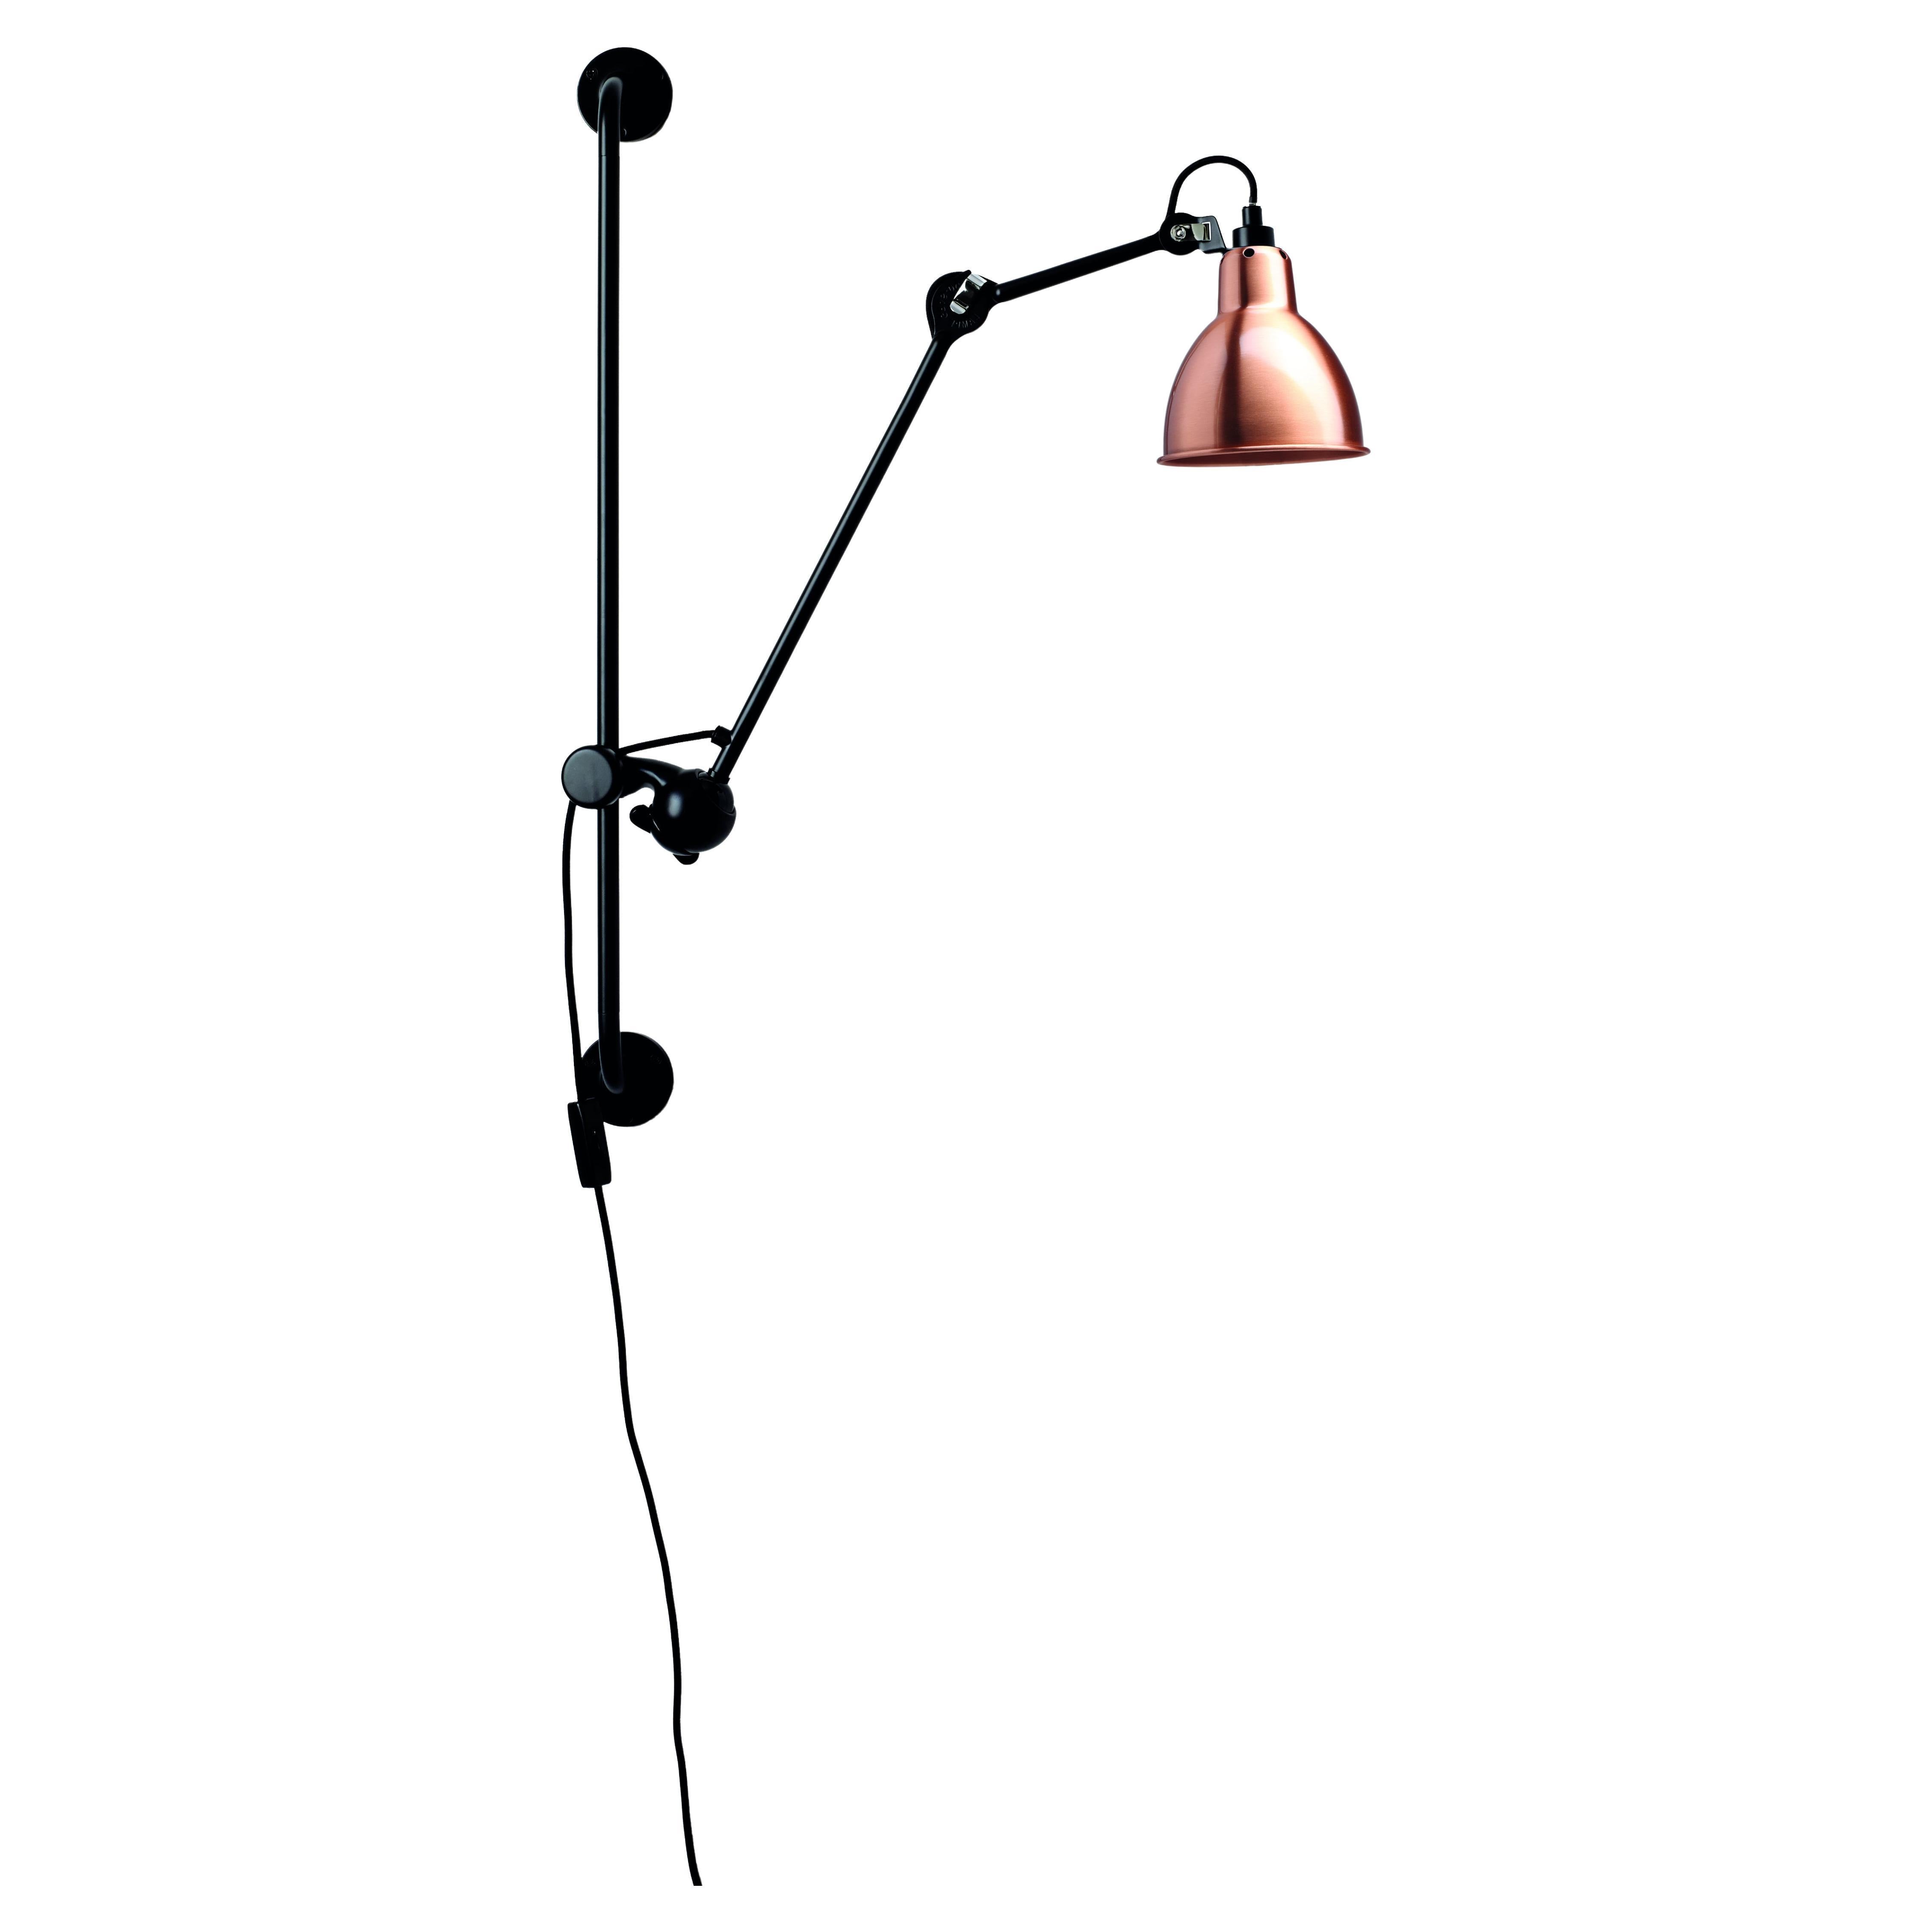 DCW Editions La Lampe Gras N°210 Wall Lamp in Black Arm and Copper Shade For Sale